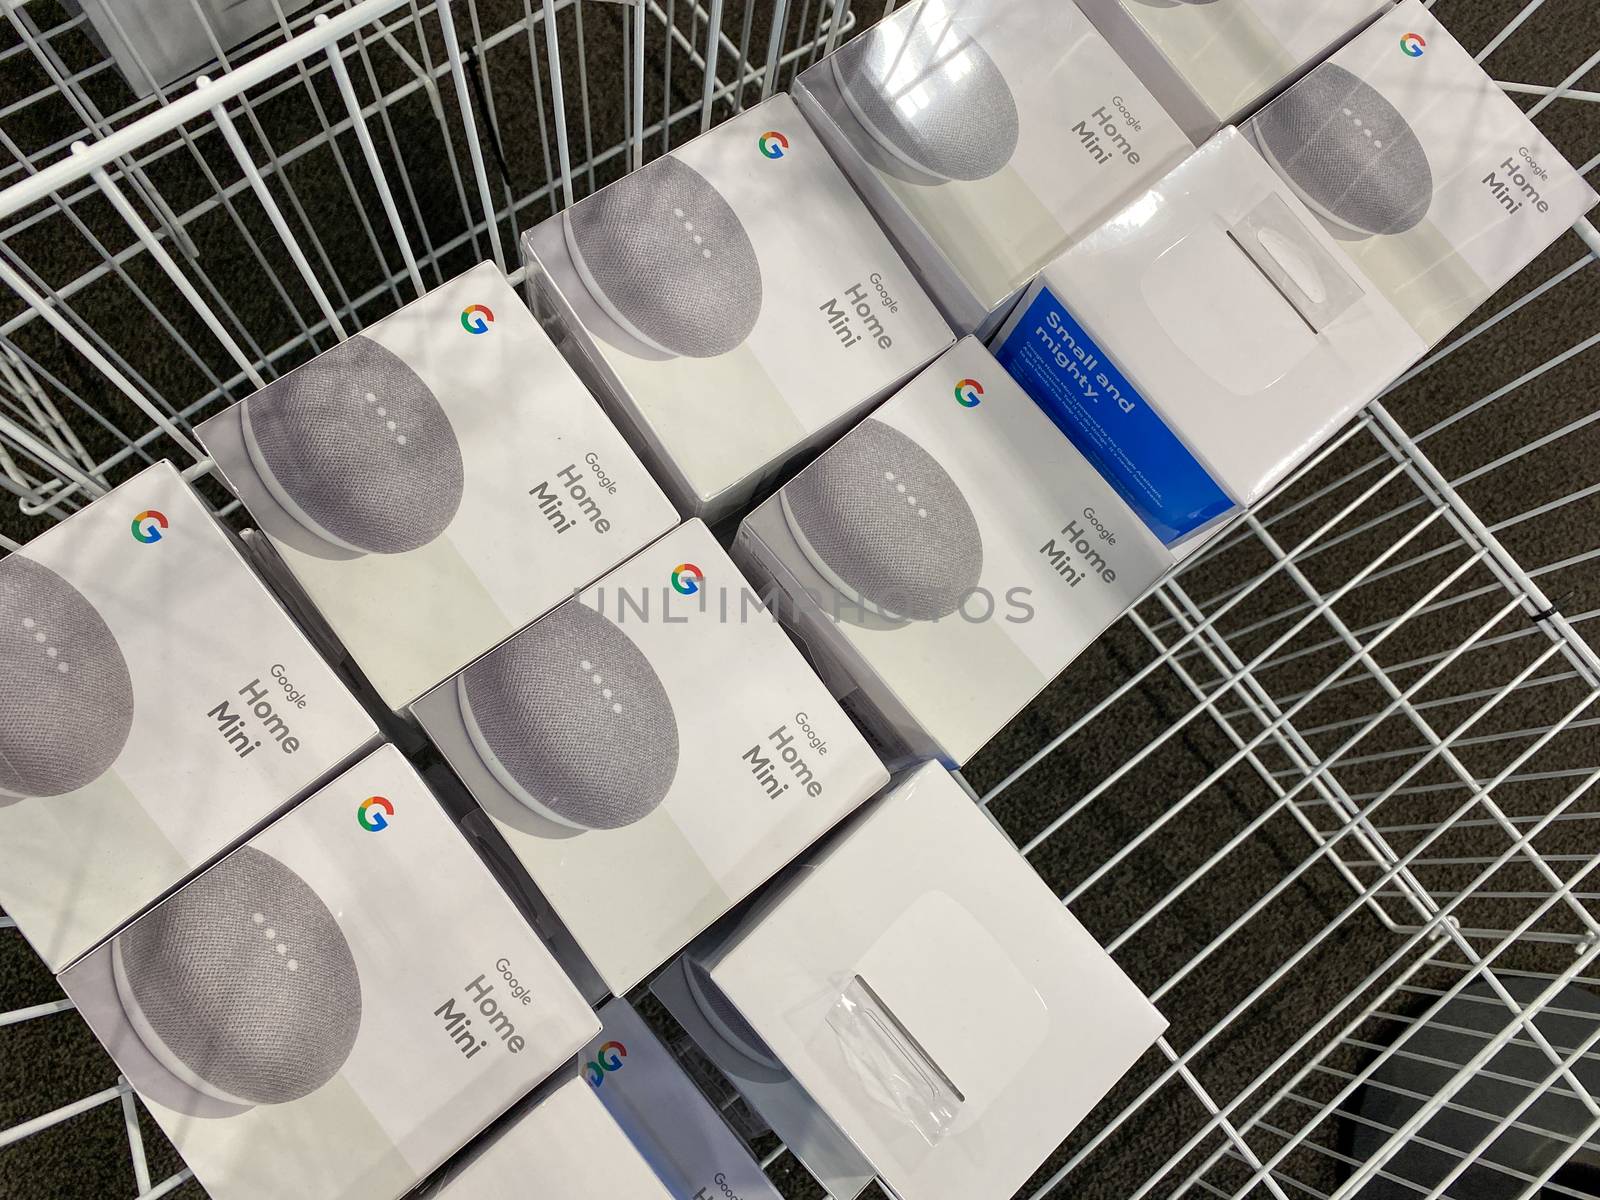 A bin of Google Nest Mini Home devices display at Best Buy in Or by Jshanebutt